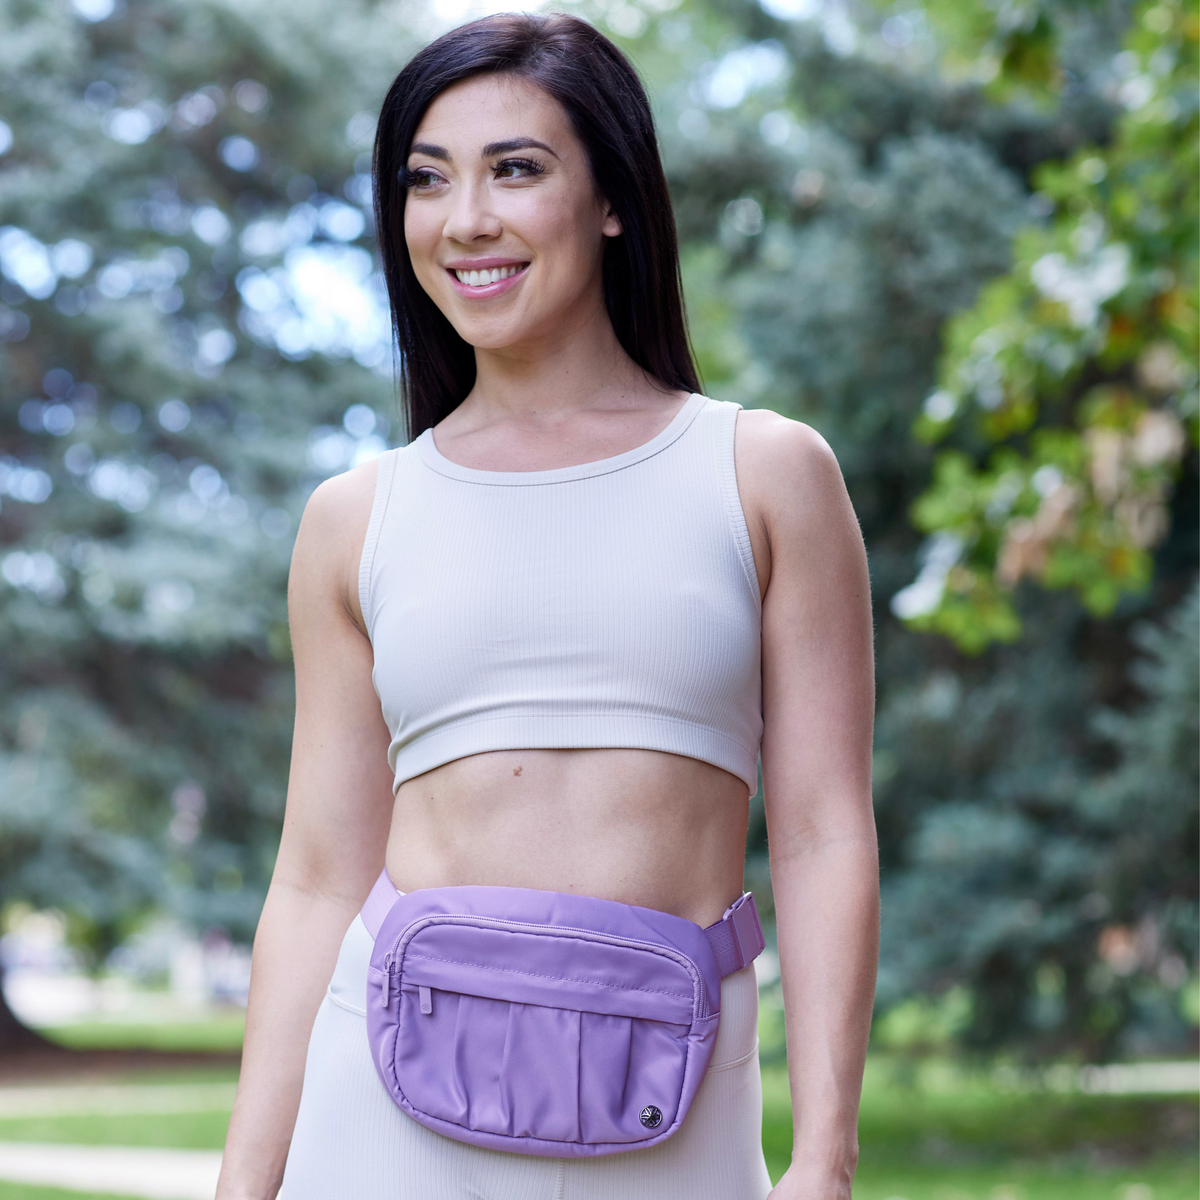 Woman outside with Out & About Waist Pack around waist